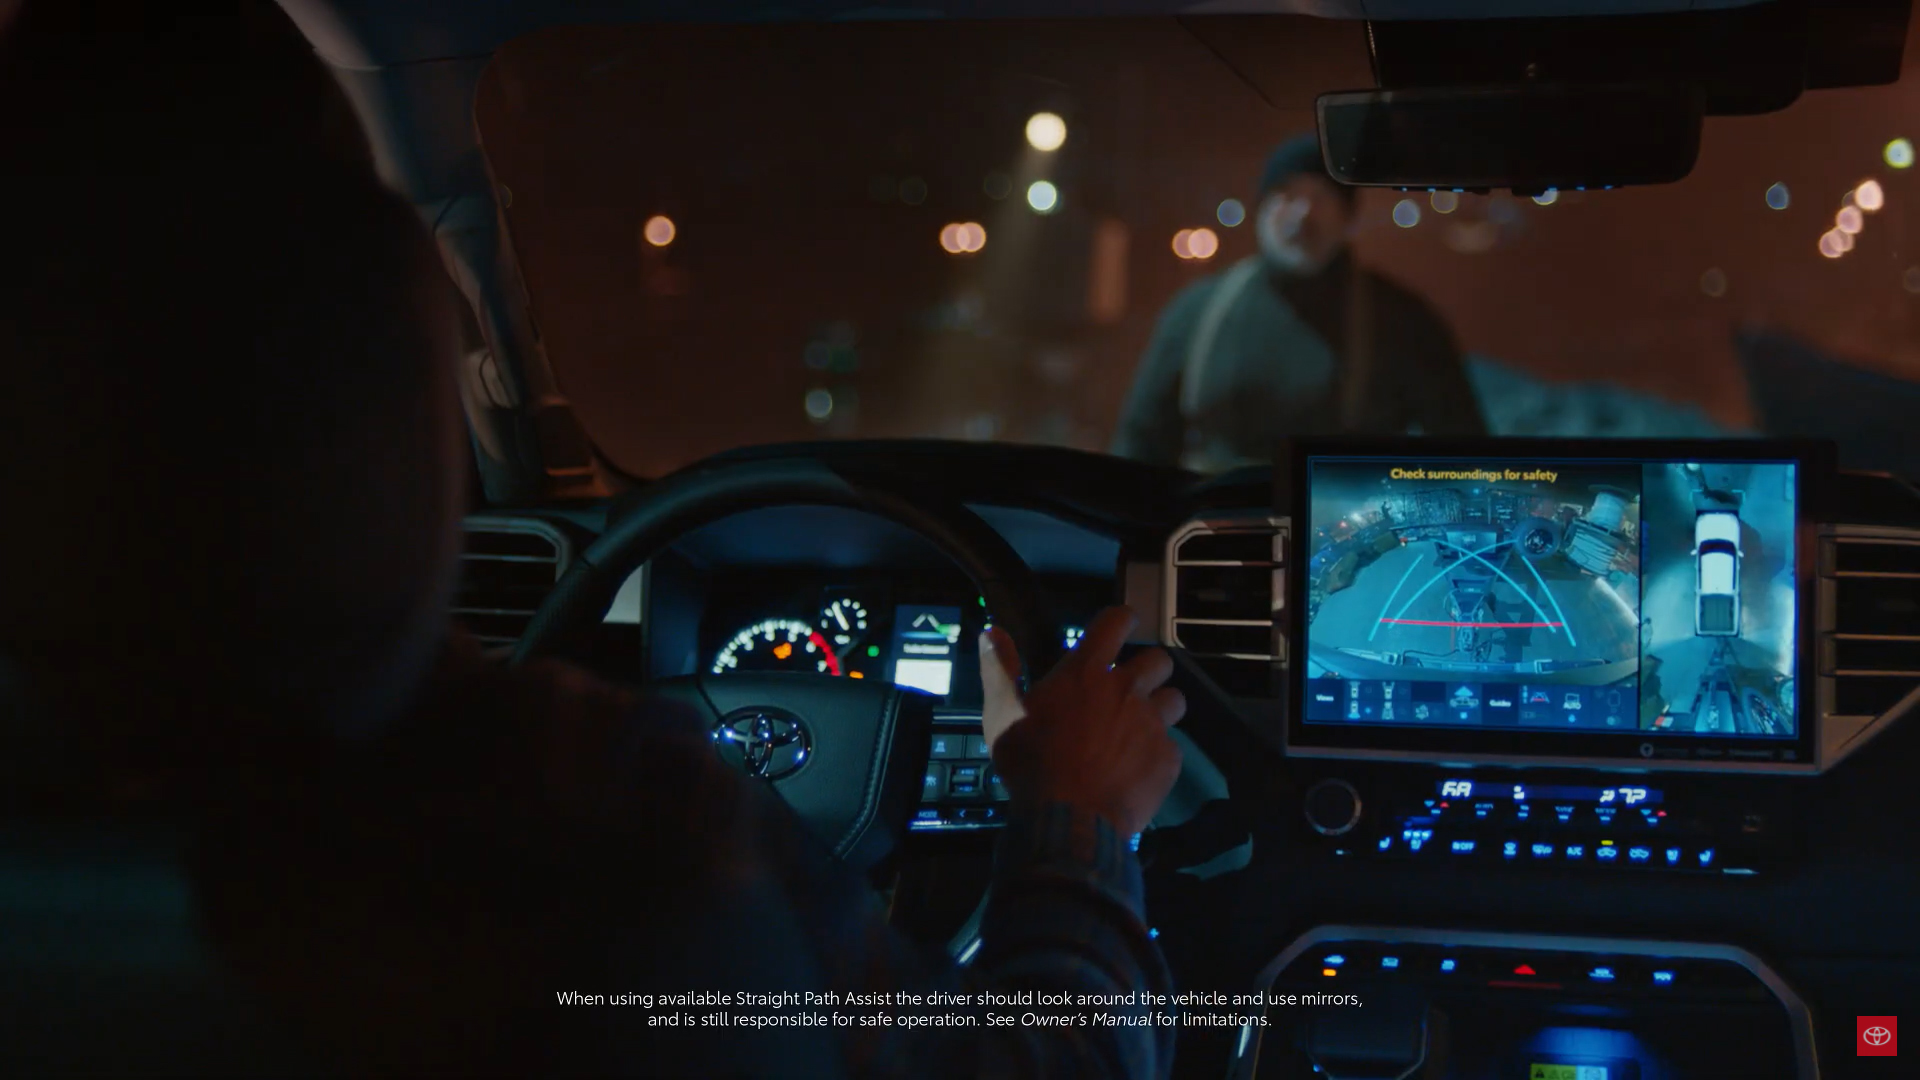 Toyota’s all-new 2022 Tundra is featured in “Born to Lend a Hand” developed by Conill Advertising.